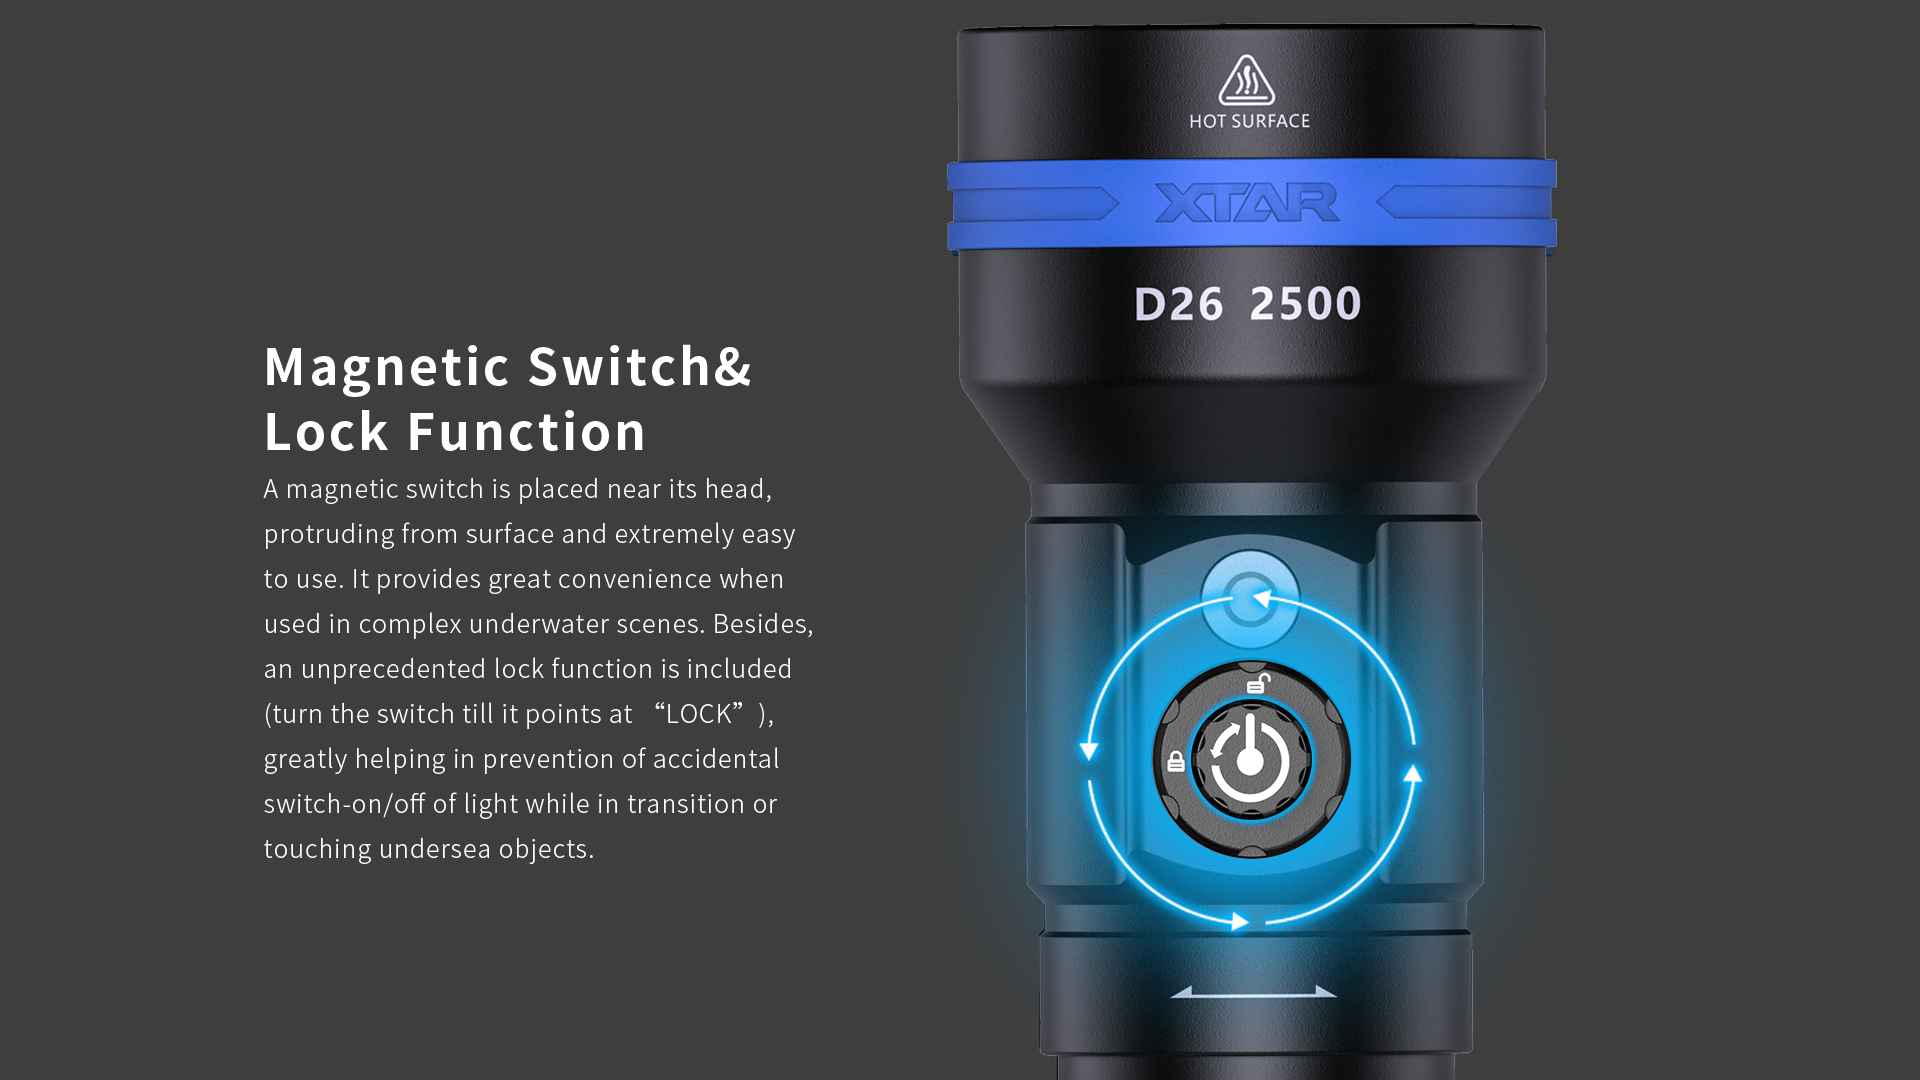 Magnetic press-button switch with battery indicator and lock function, ensures safe diving.